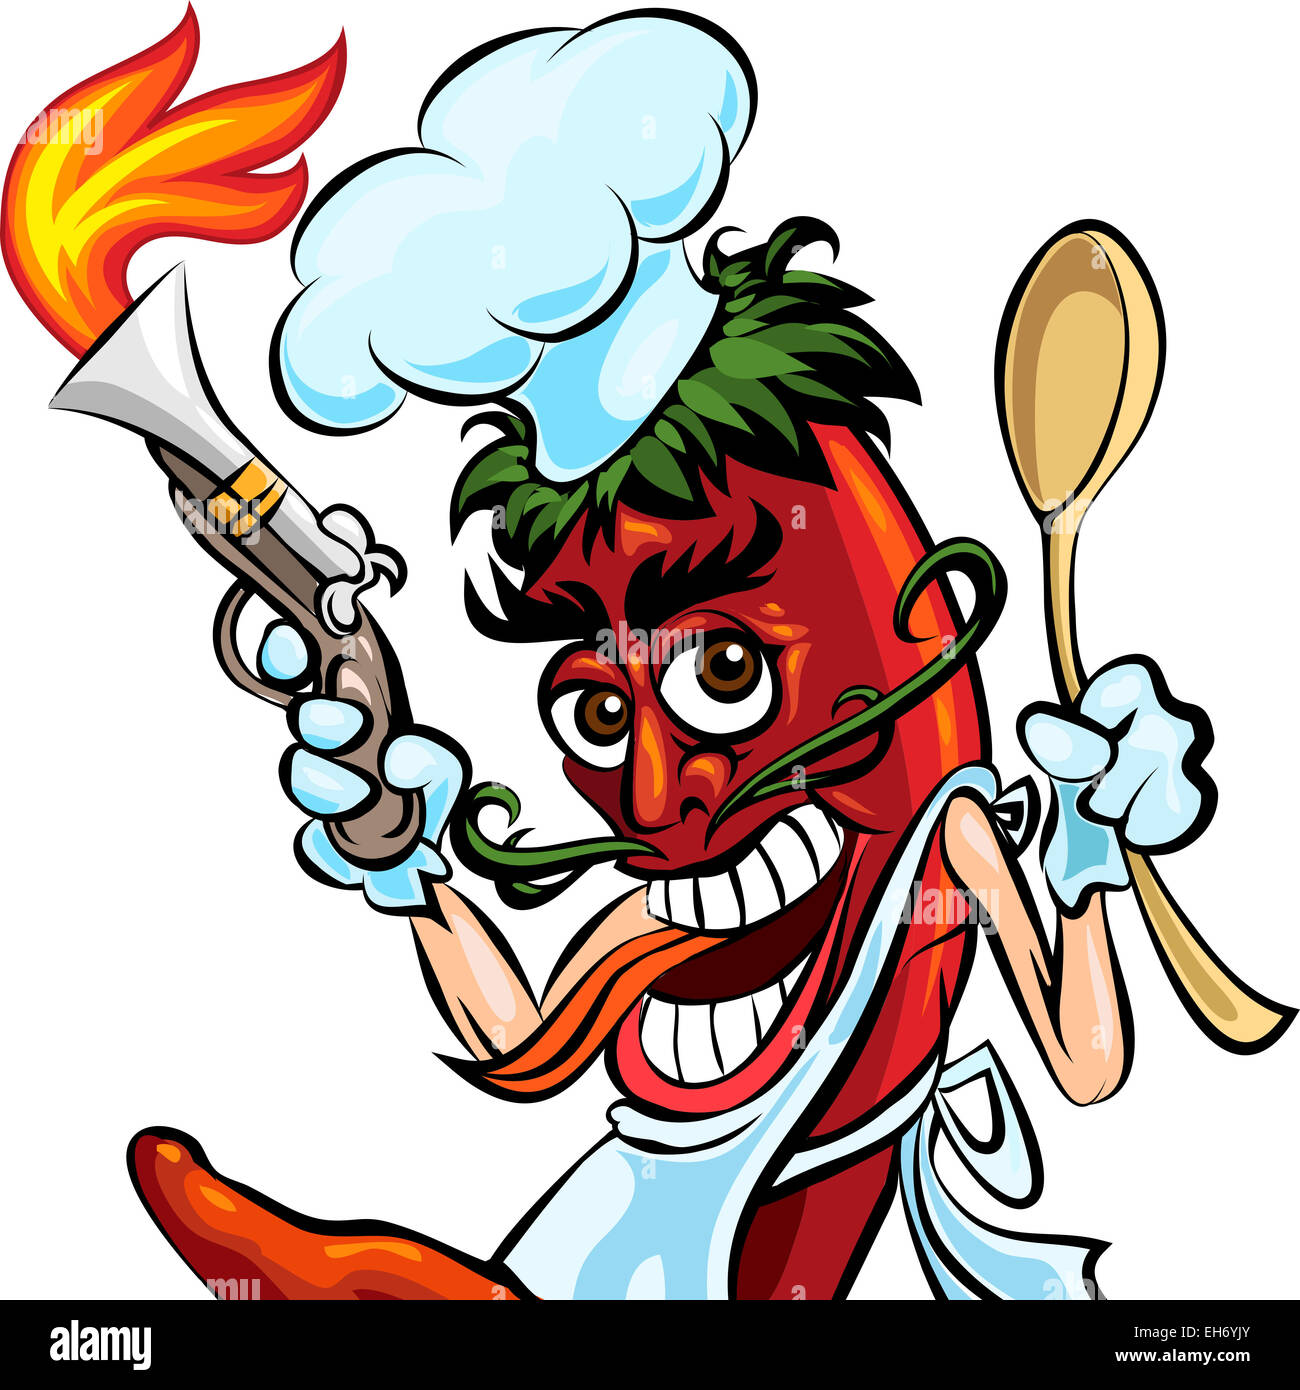 Humorous illustration of red hot chili pepper in cook uniform with a spoon and fire gun Stock Photo